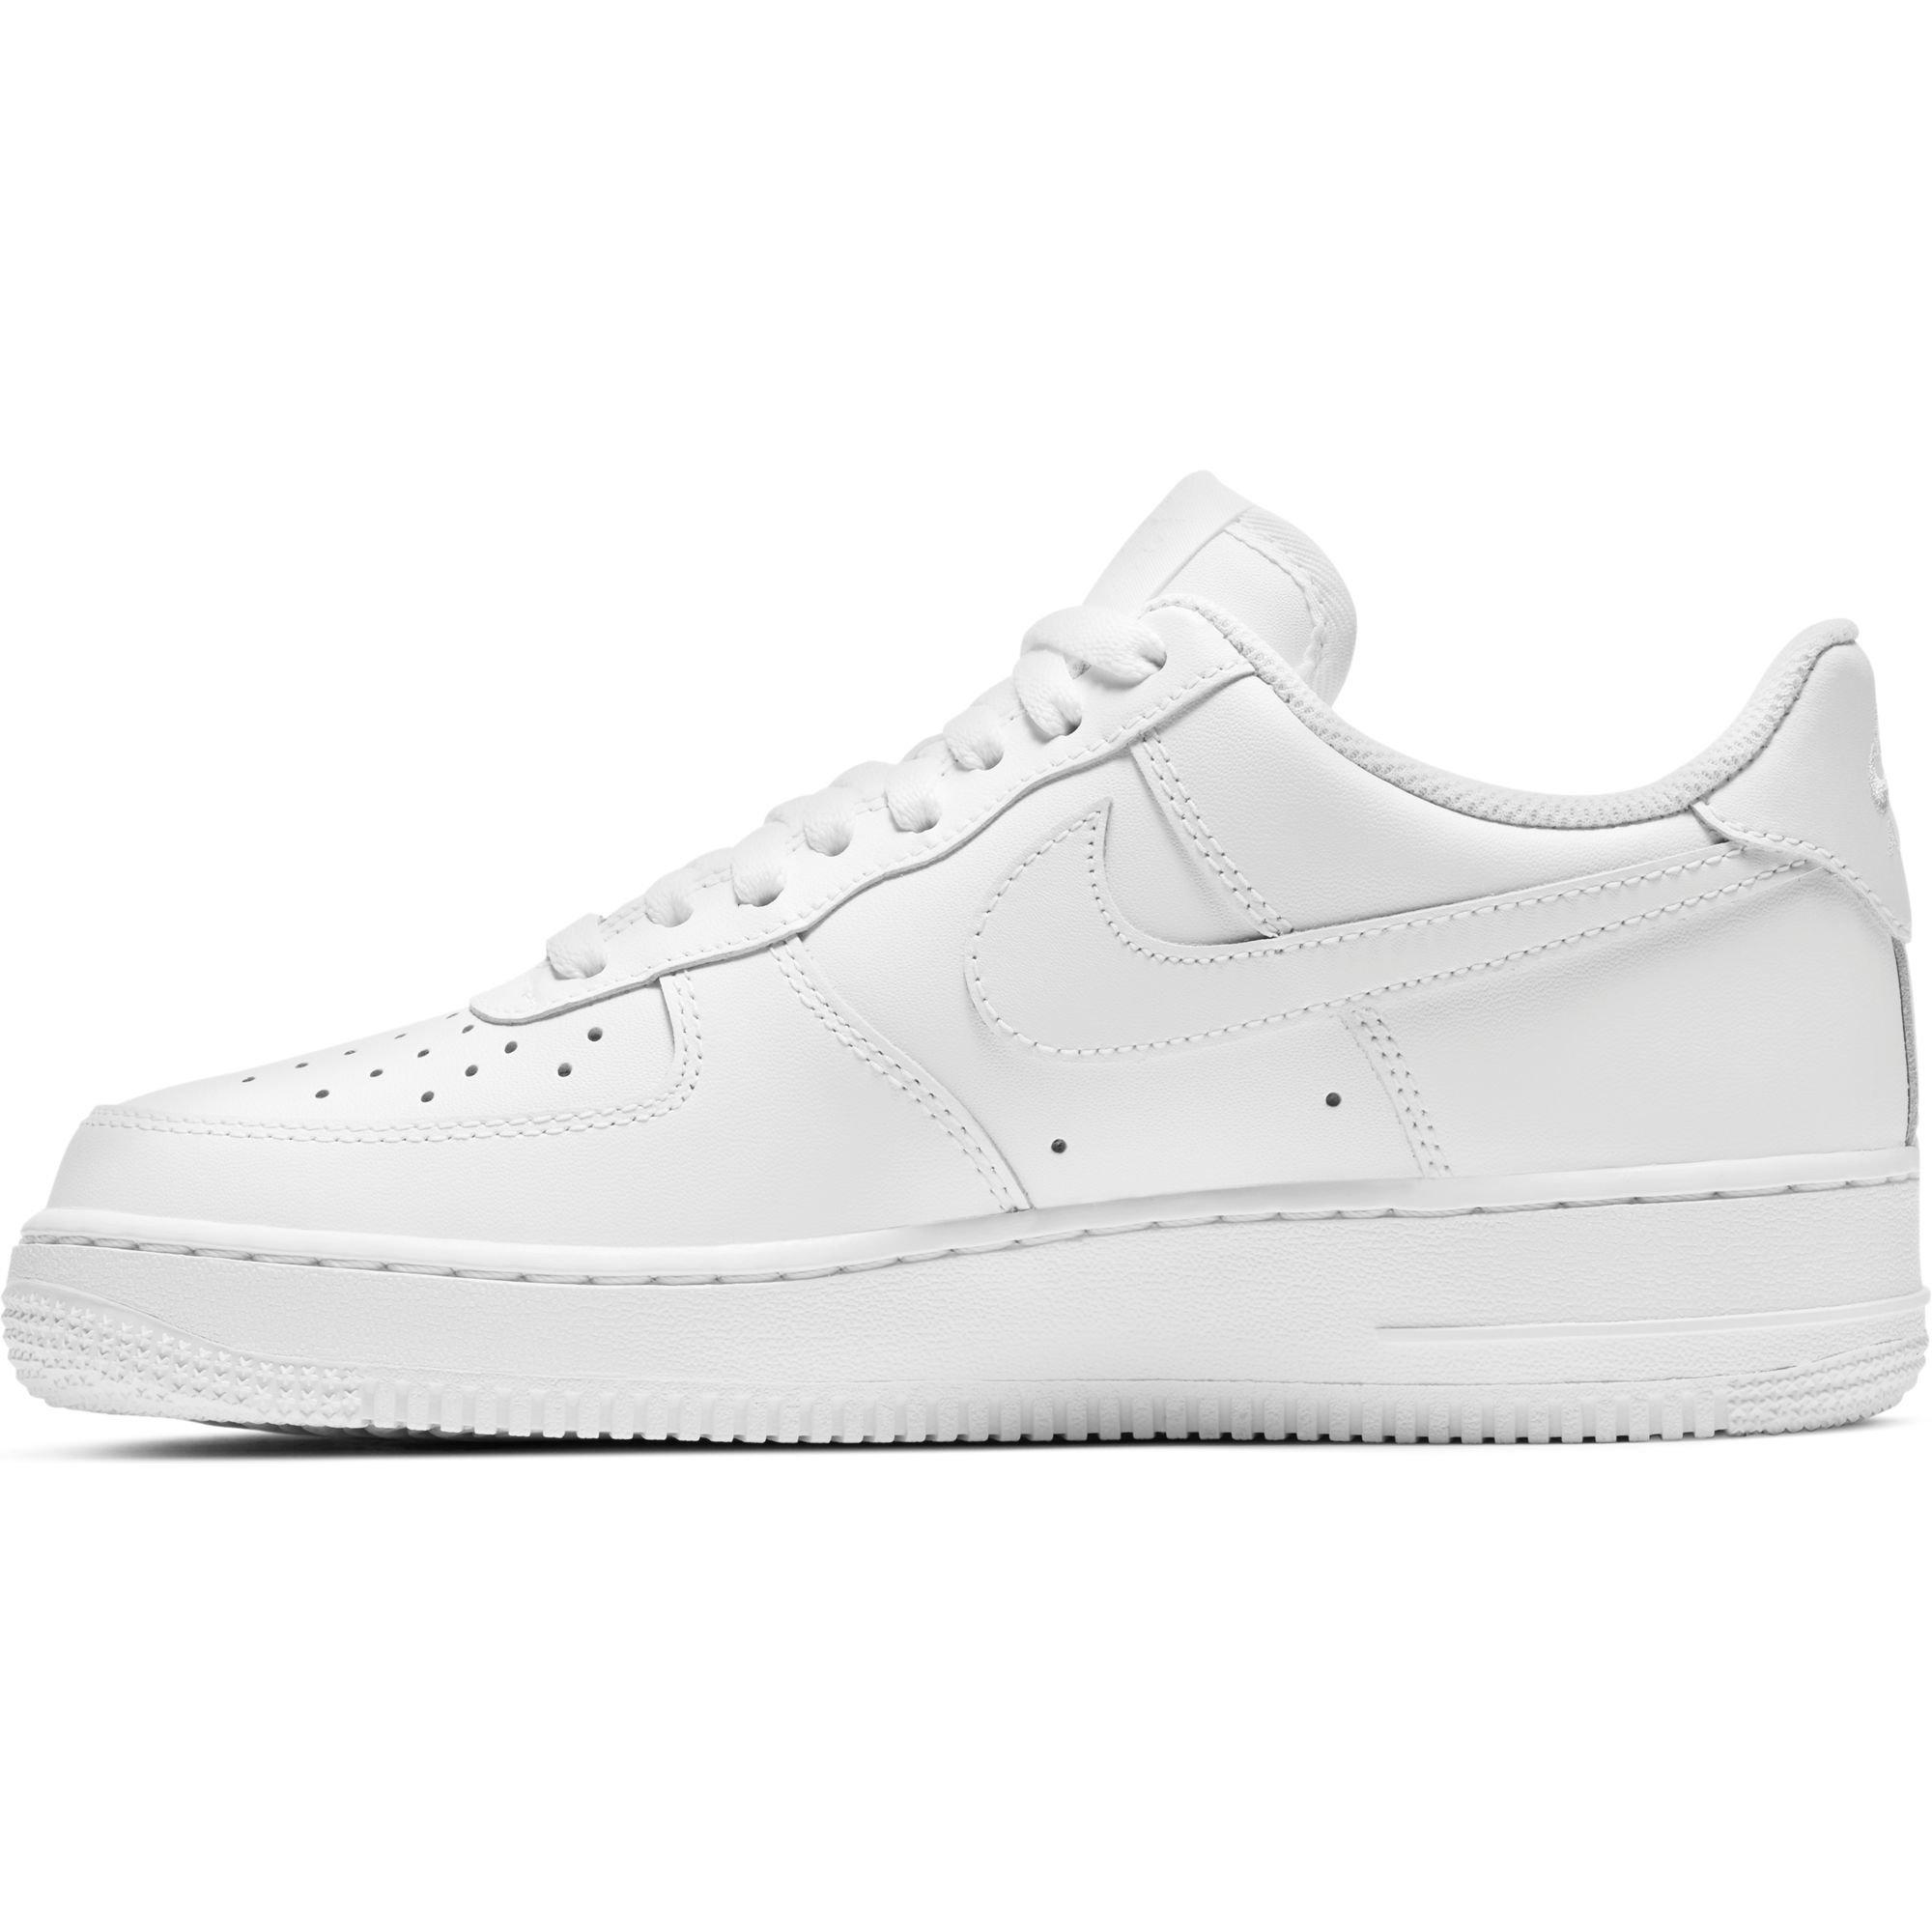 nike air force 1 07 womens size 8 white